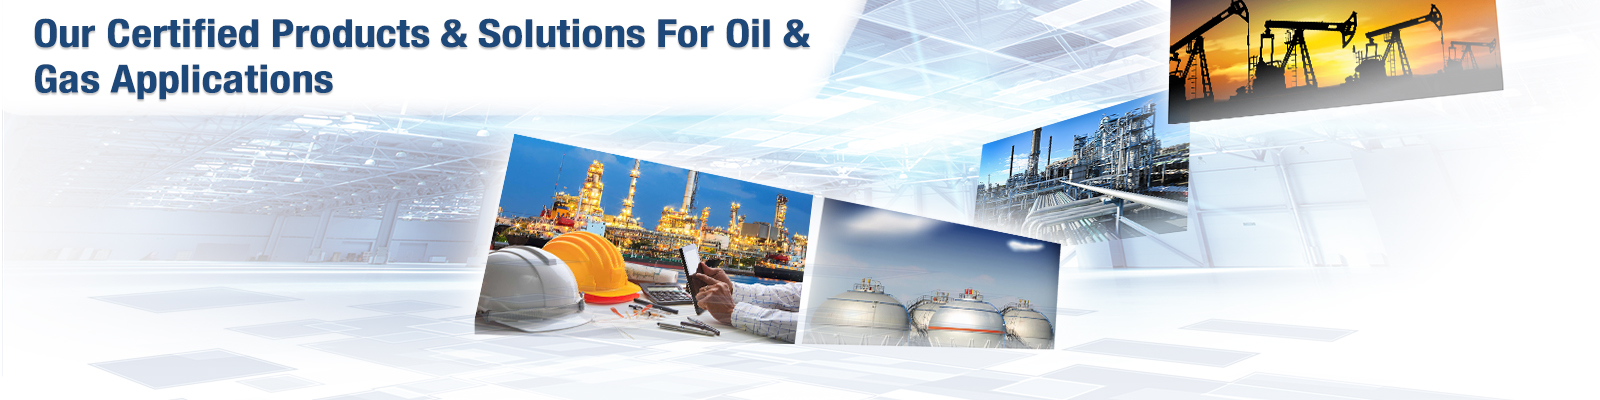 Oil& Gas Applications 